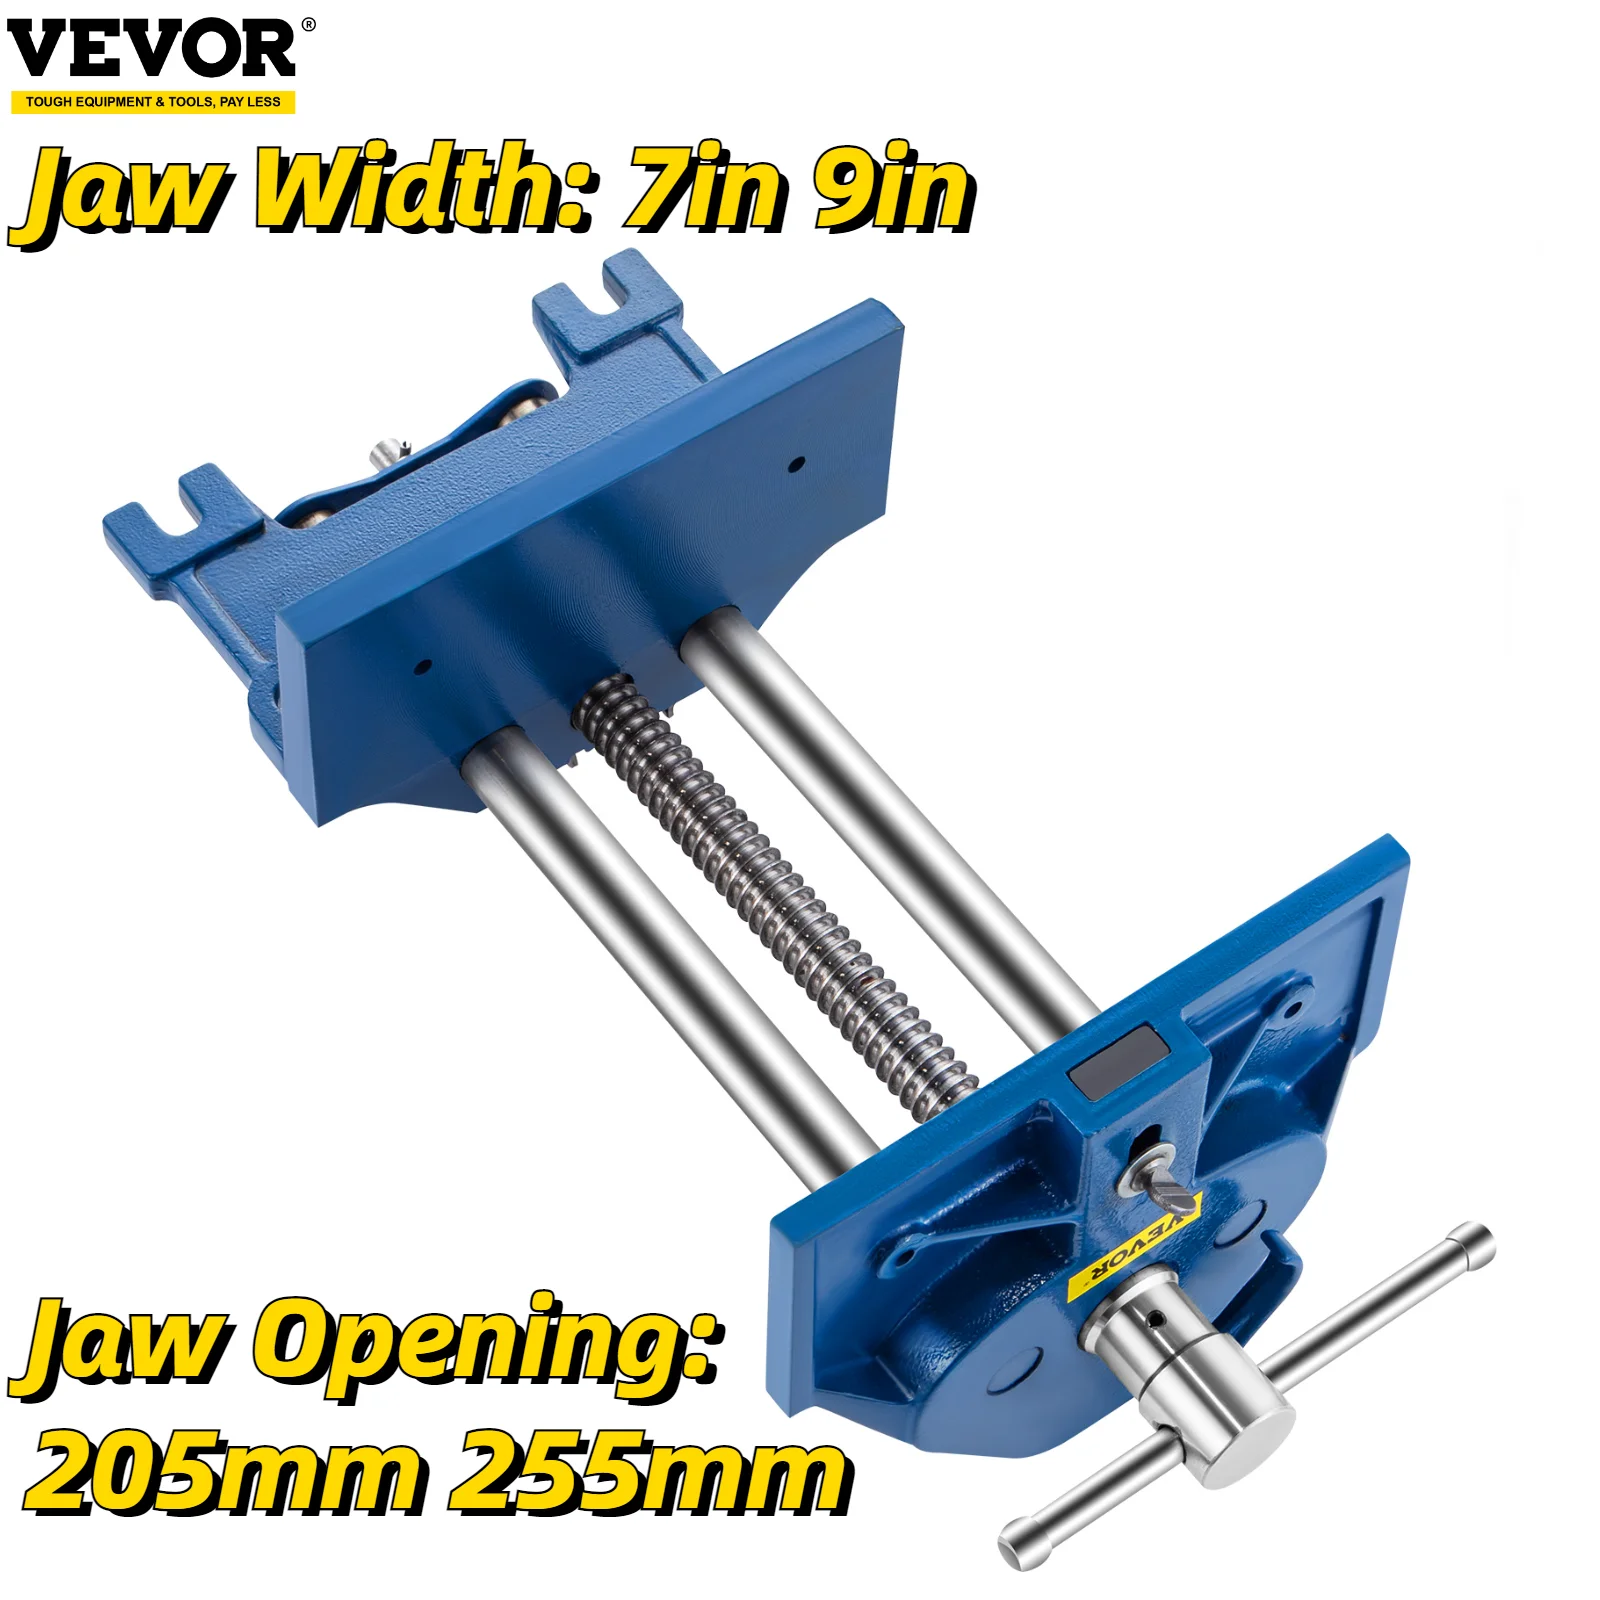 

VEVOR Woodworking Bench Vise Desk Clamp Wood Vice Guide Rods with Lever 7/9in Jaw Bed Metal Clip Fixed Vice Repair Assisst Tool